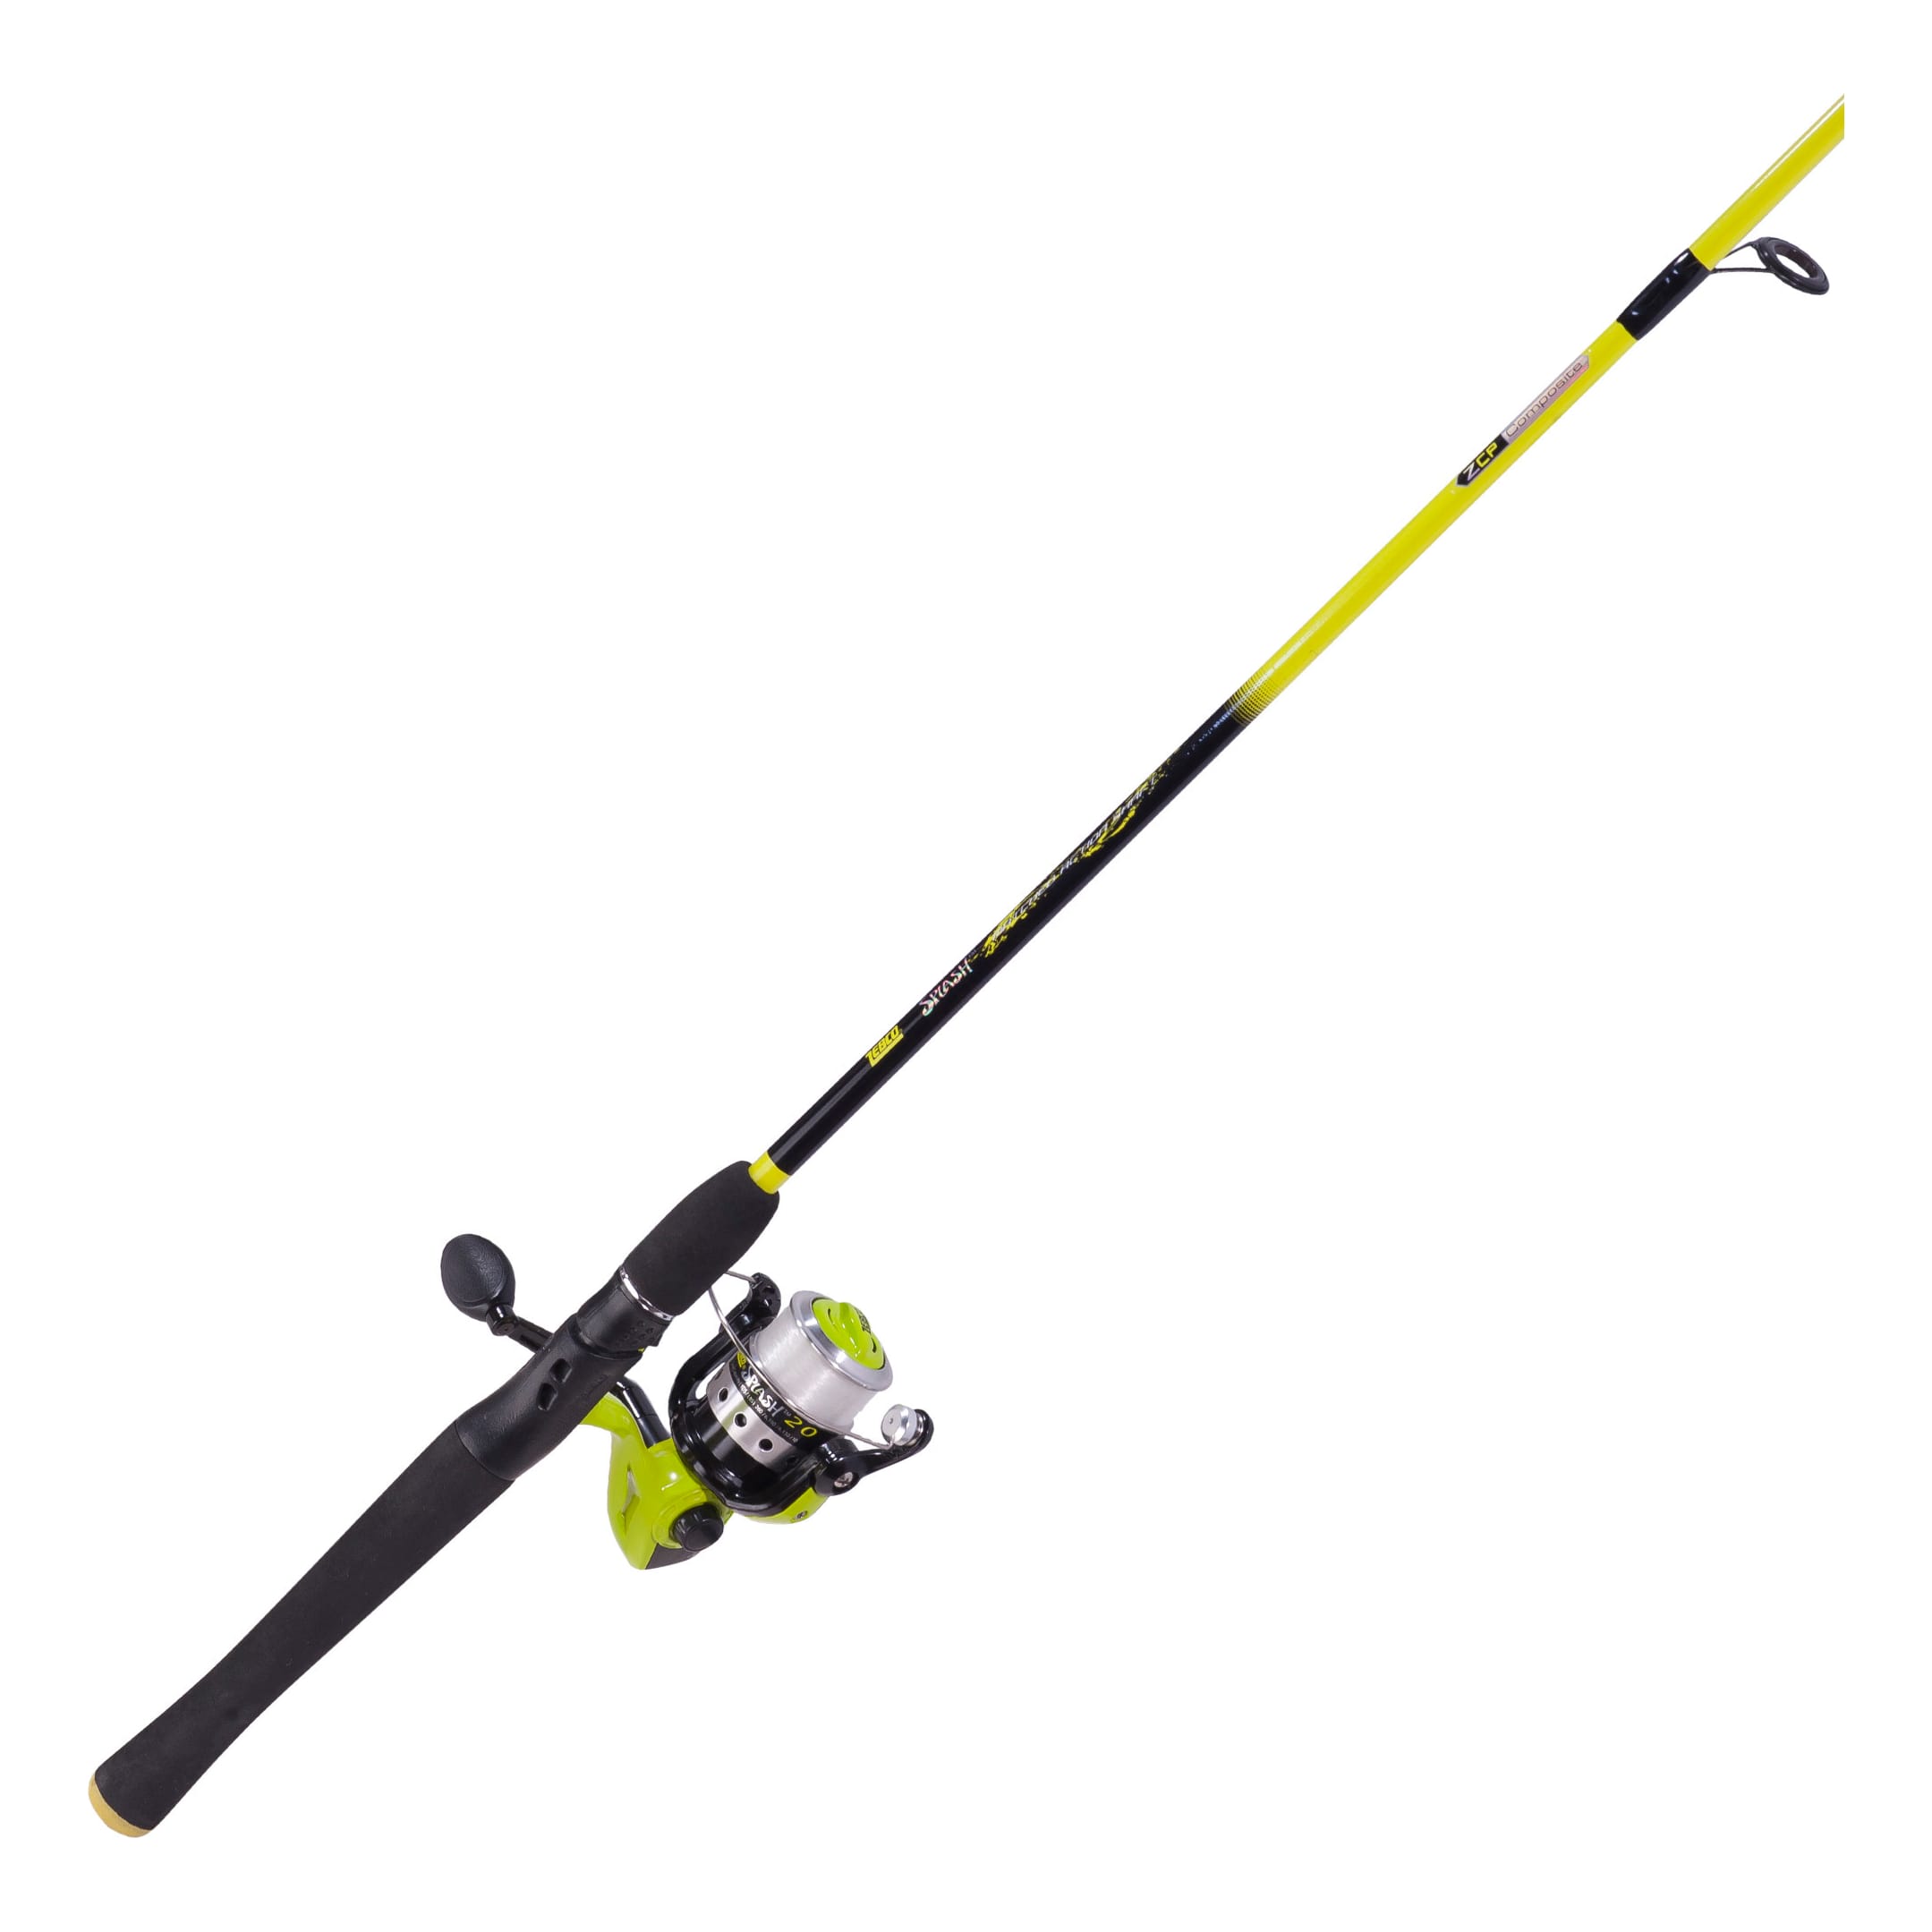 Ready Tackle - Spinning - Combo, Zebco Fishing